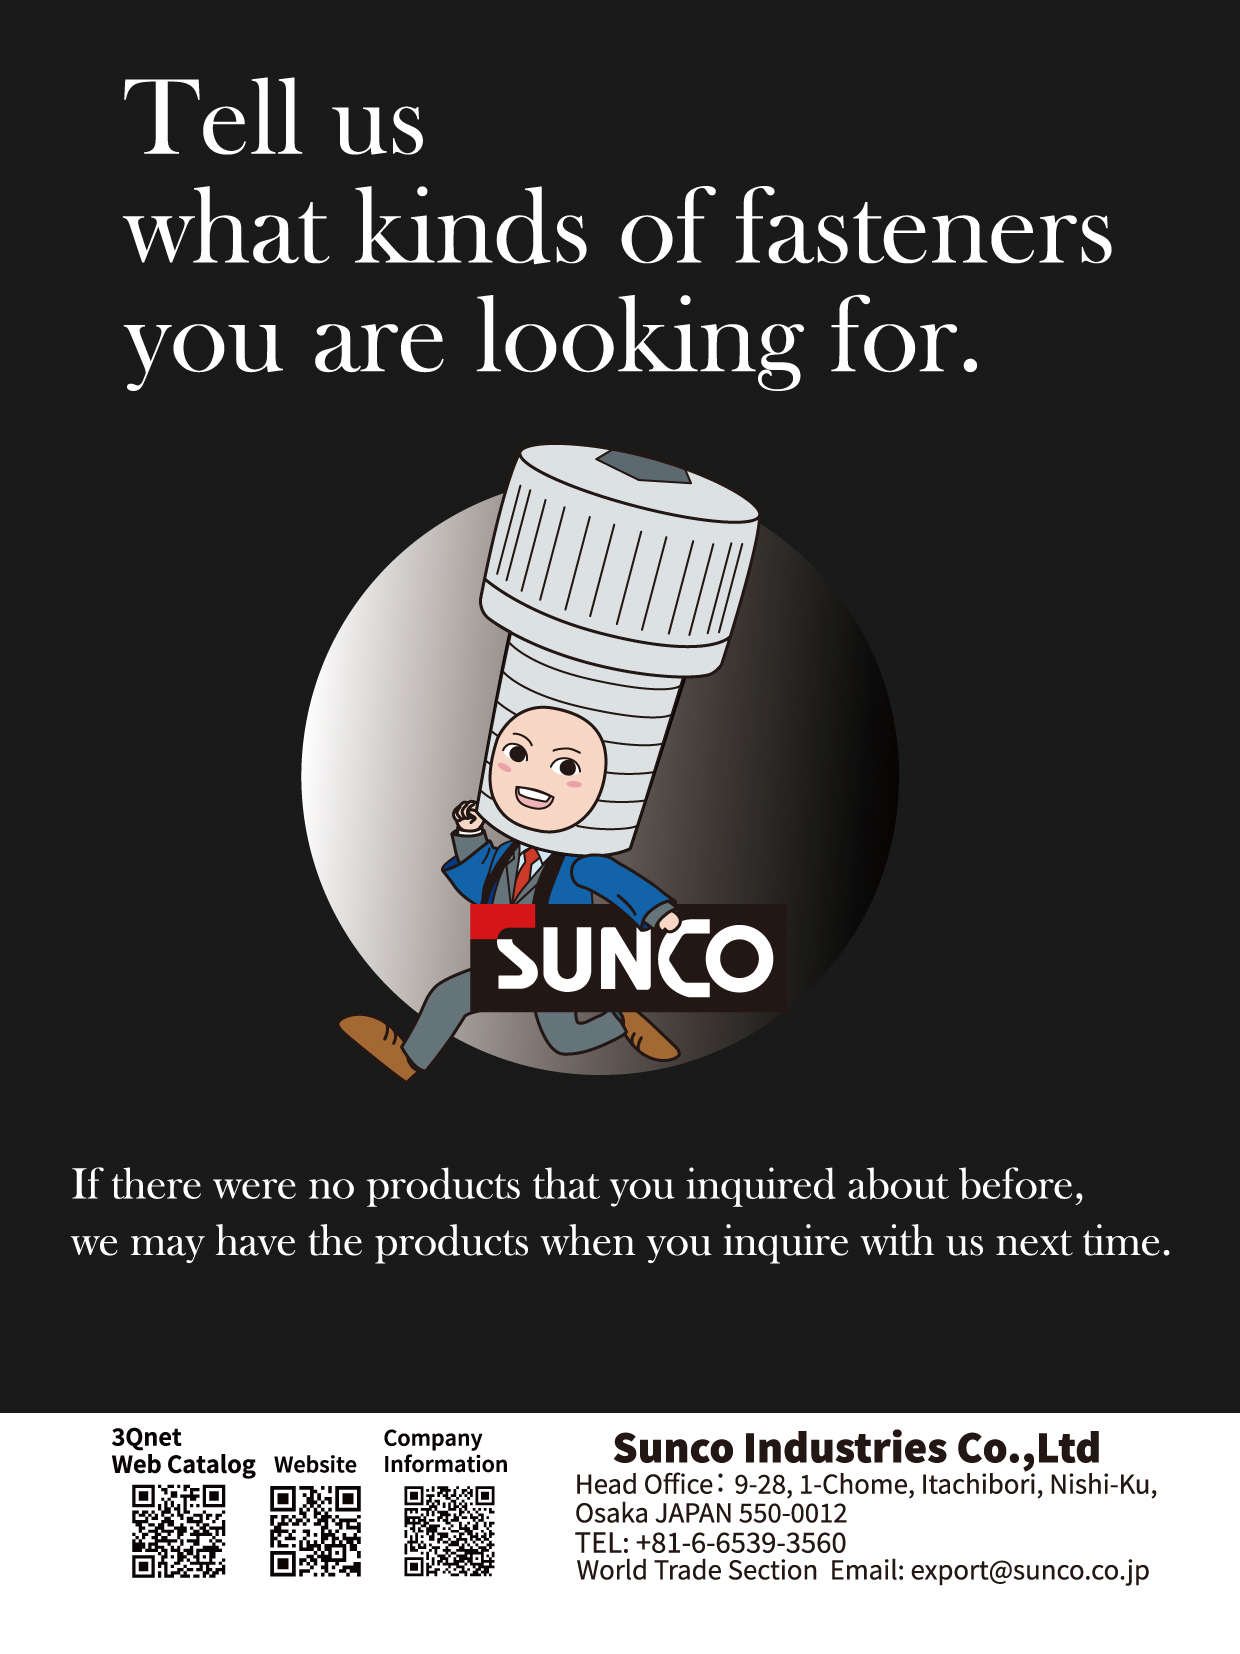 SUNCO INDUSTRIES CO., LTD. JAPAN , All Kinds of Fasteners